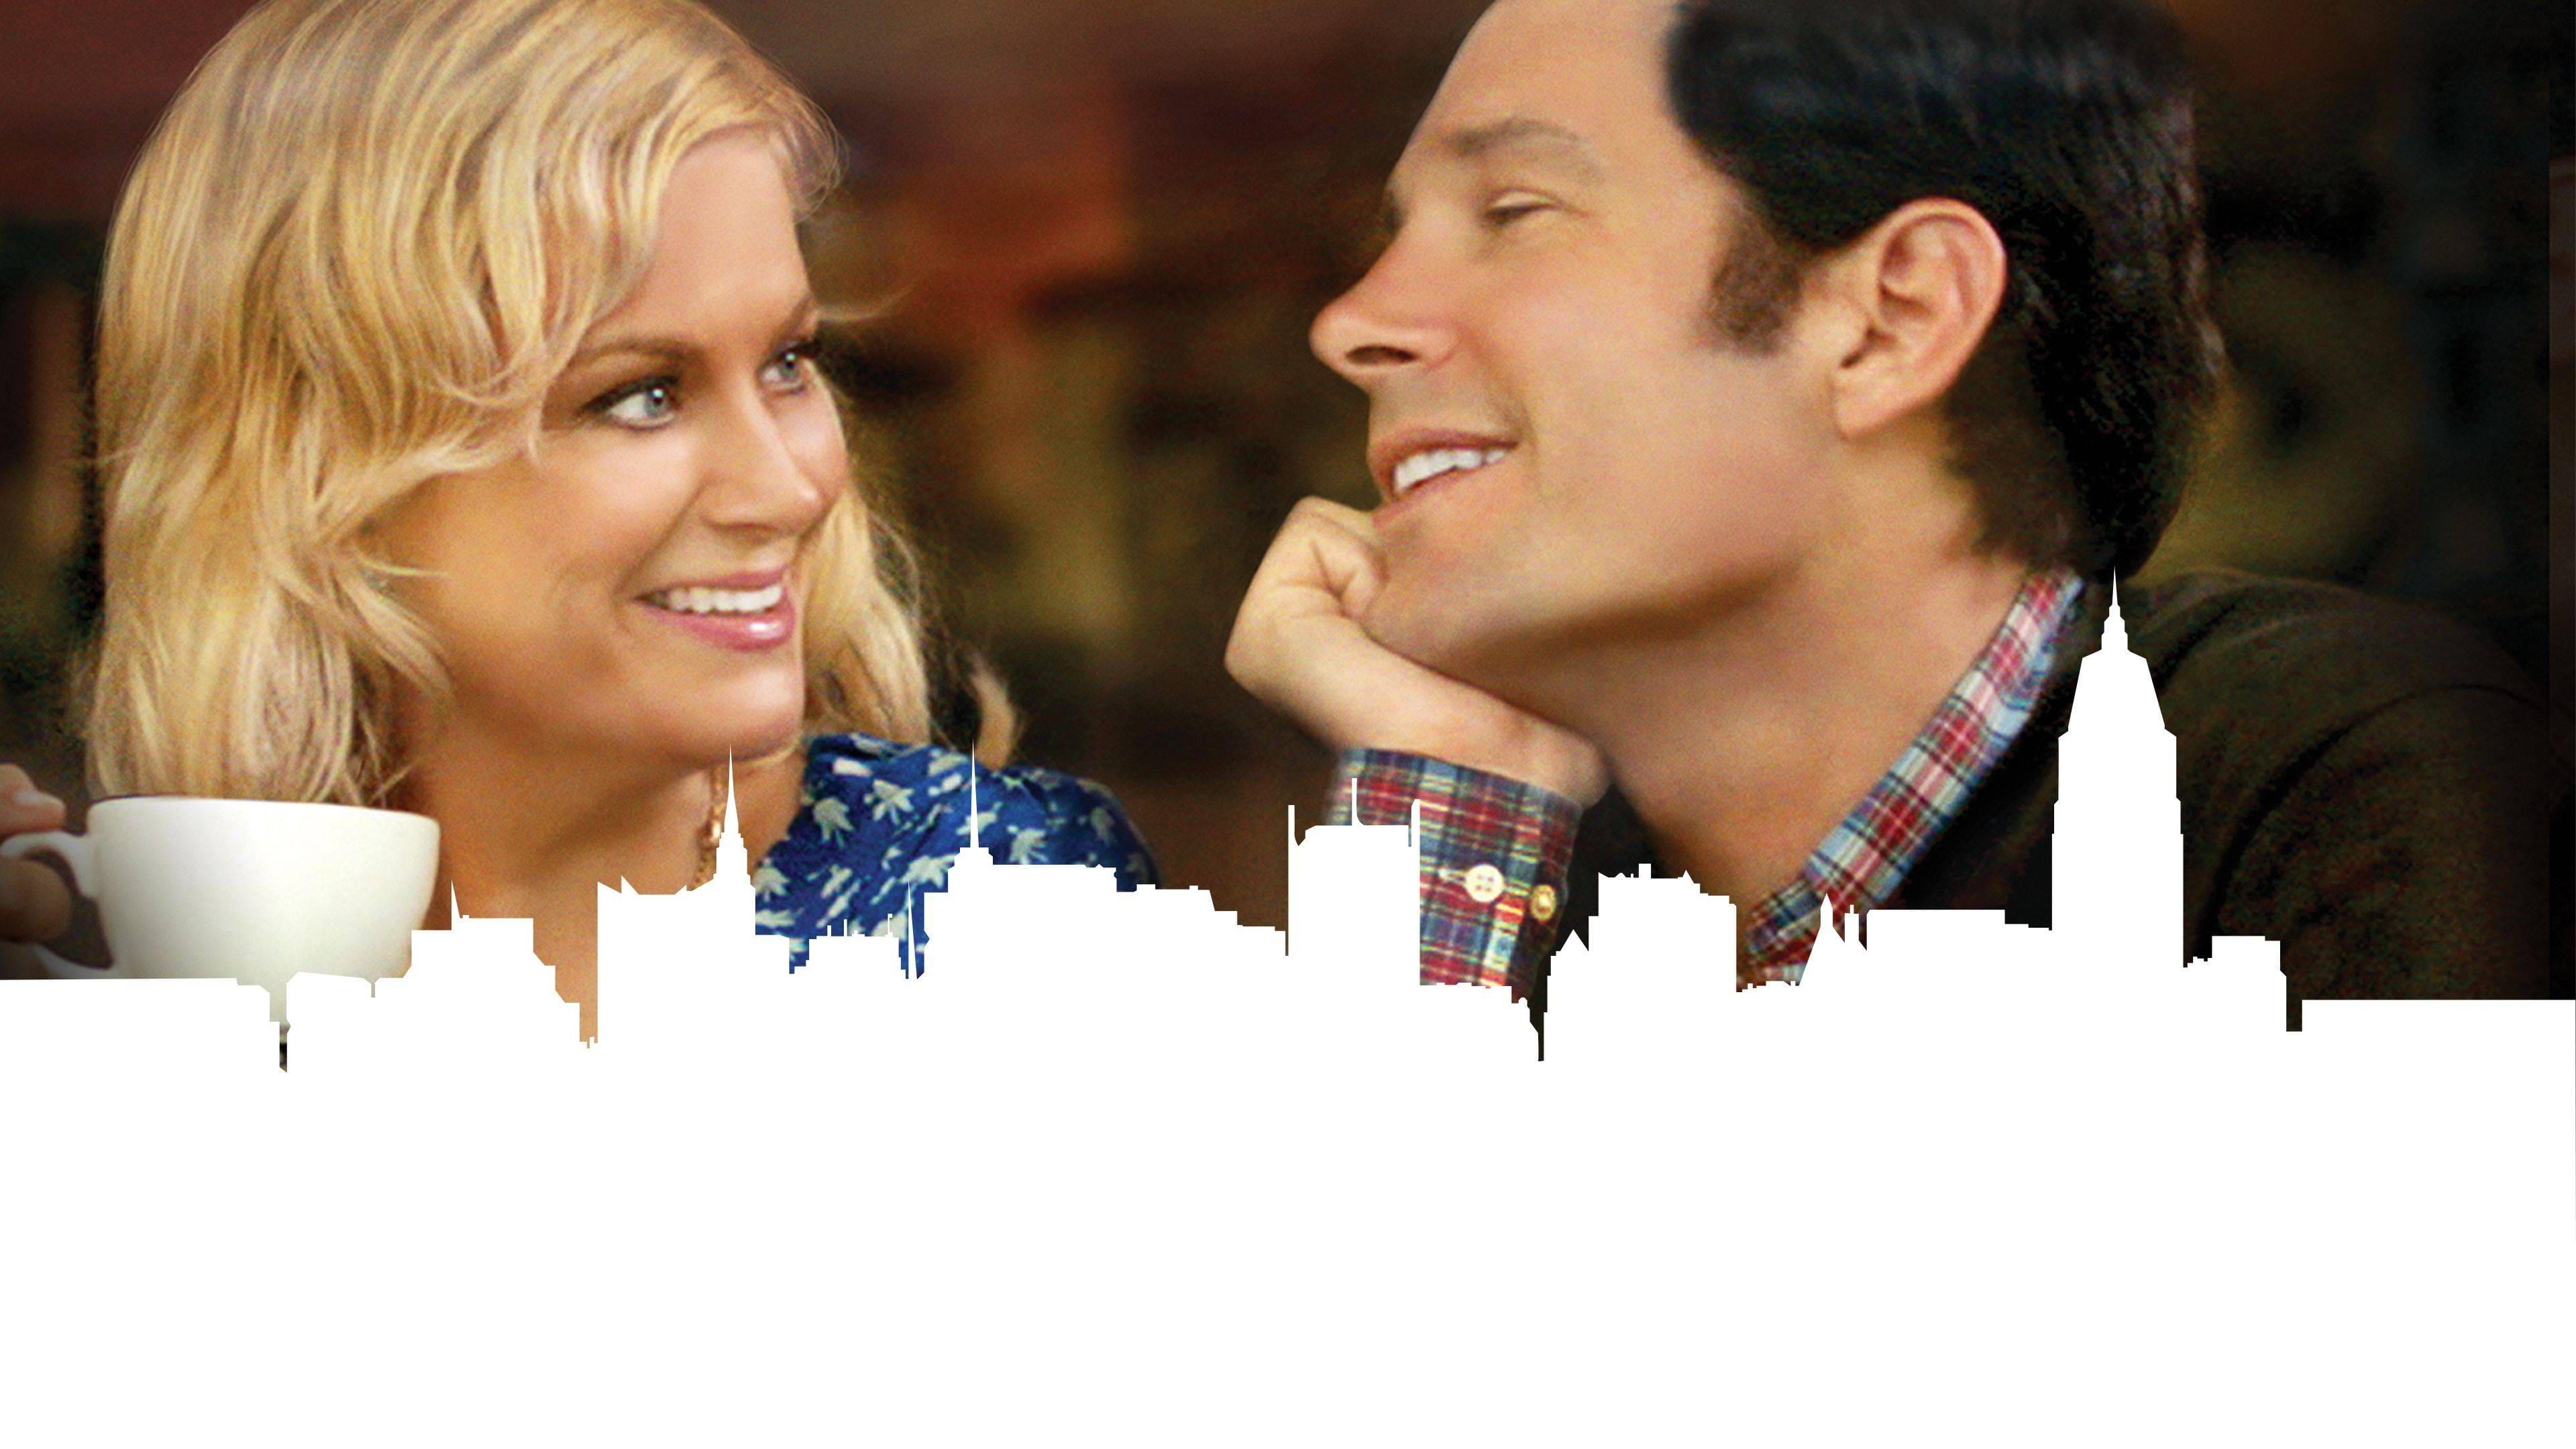 They Came Together backdrop